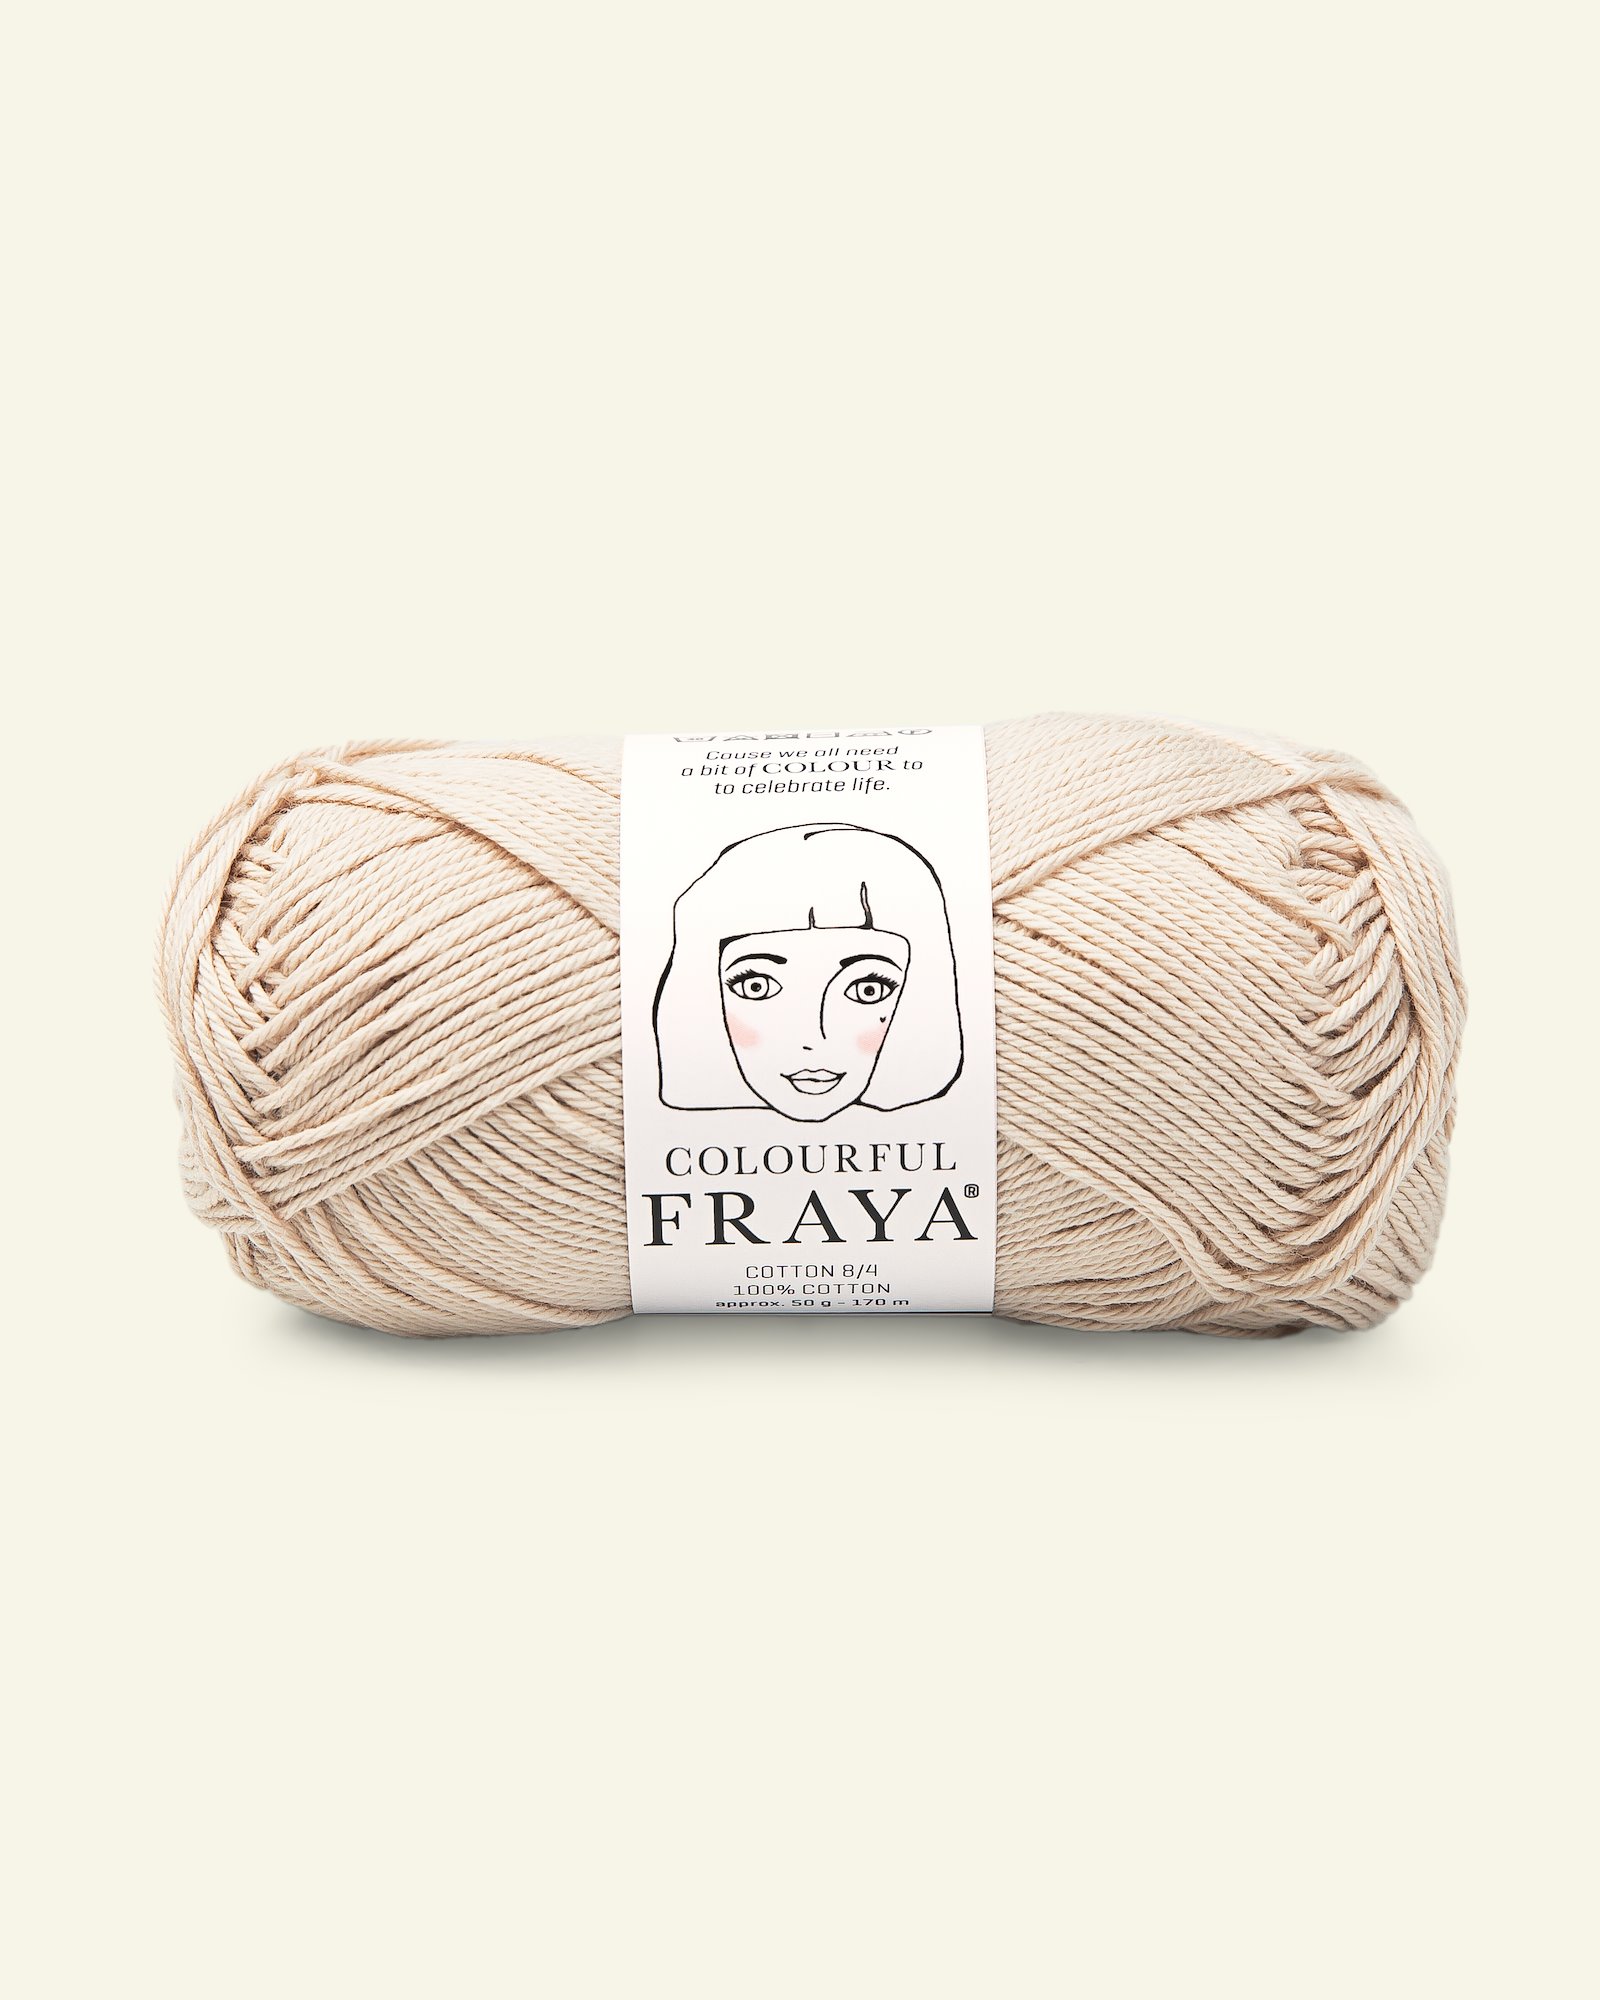 FRAYA, 100% Baumwolle, Cotton 8/4, "Colourful",  Puder 90060072_pack